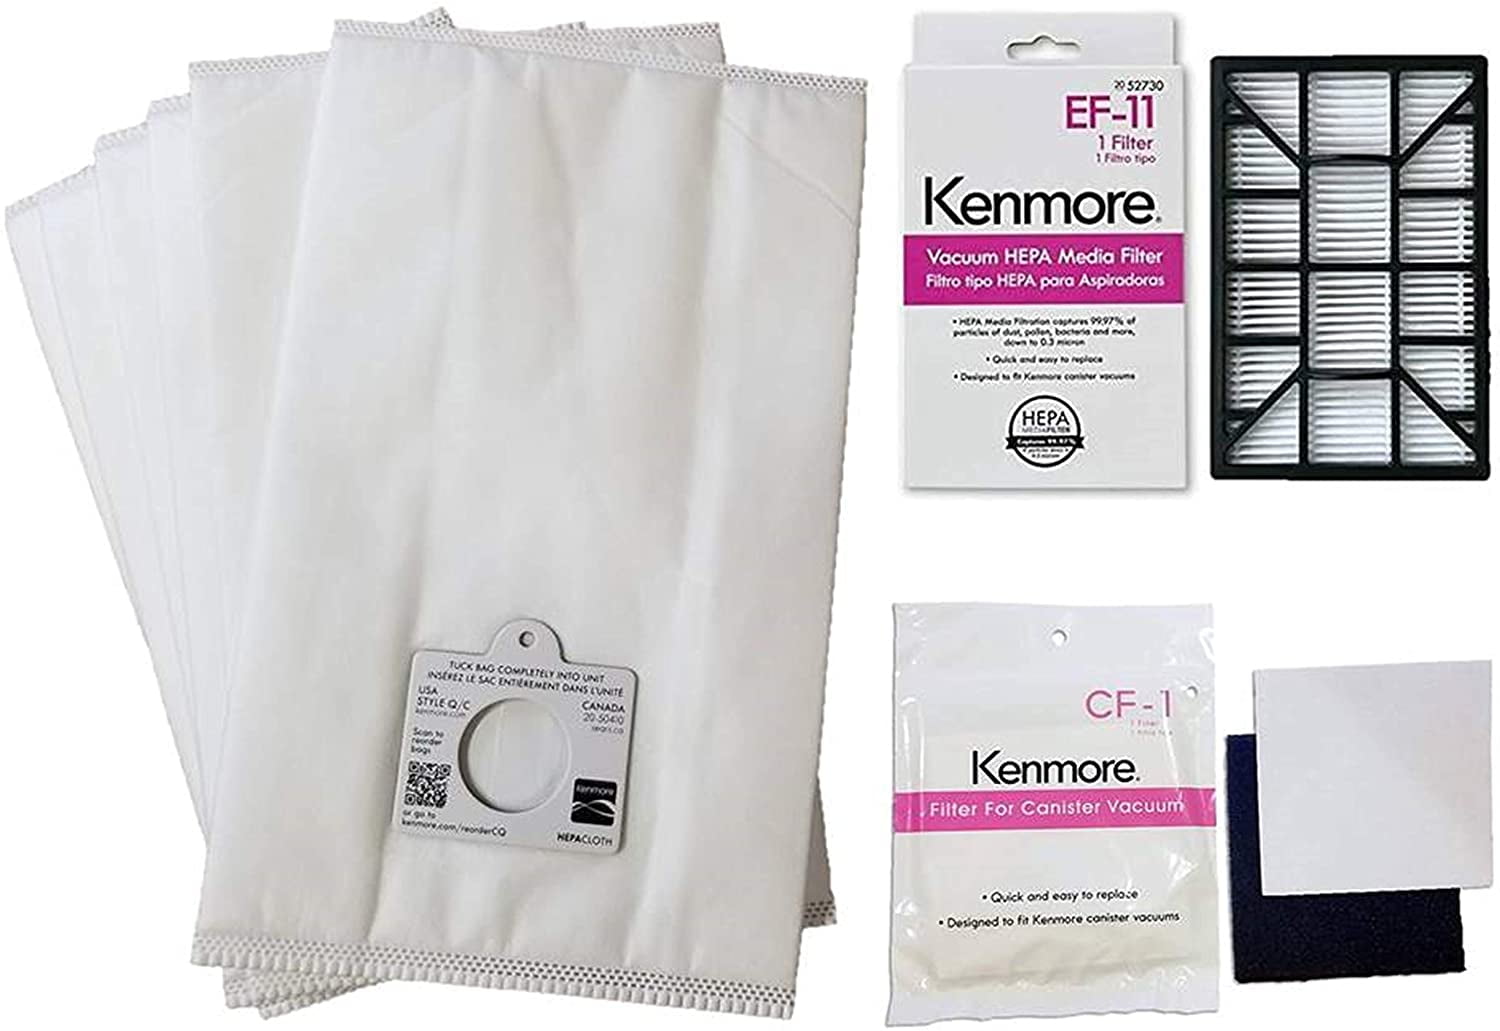 Kenmore 53292 Type Q/C Vacuum Bags HEPA for Canister Vacuums Style 6 Pack NEW 